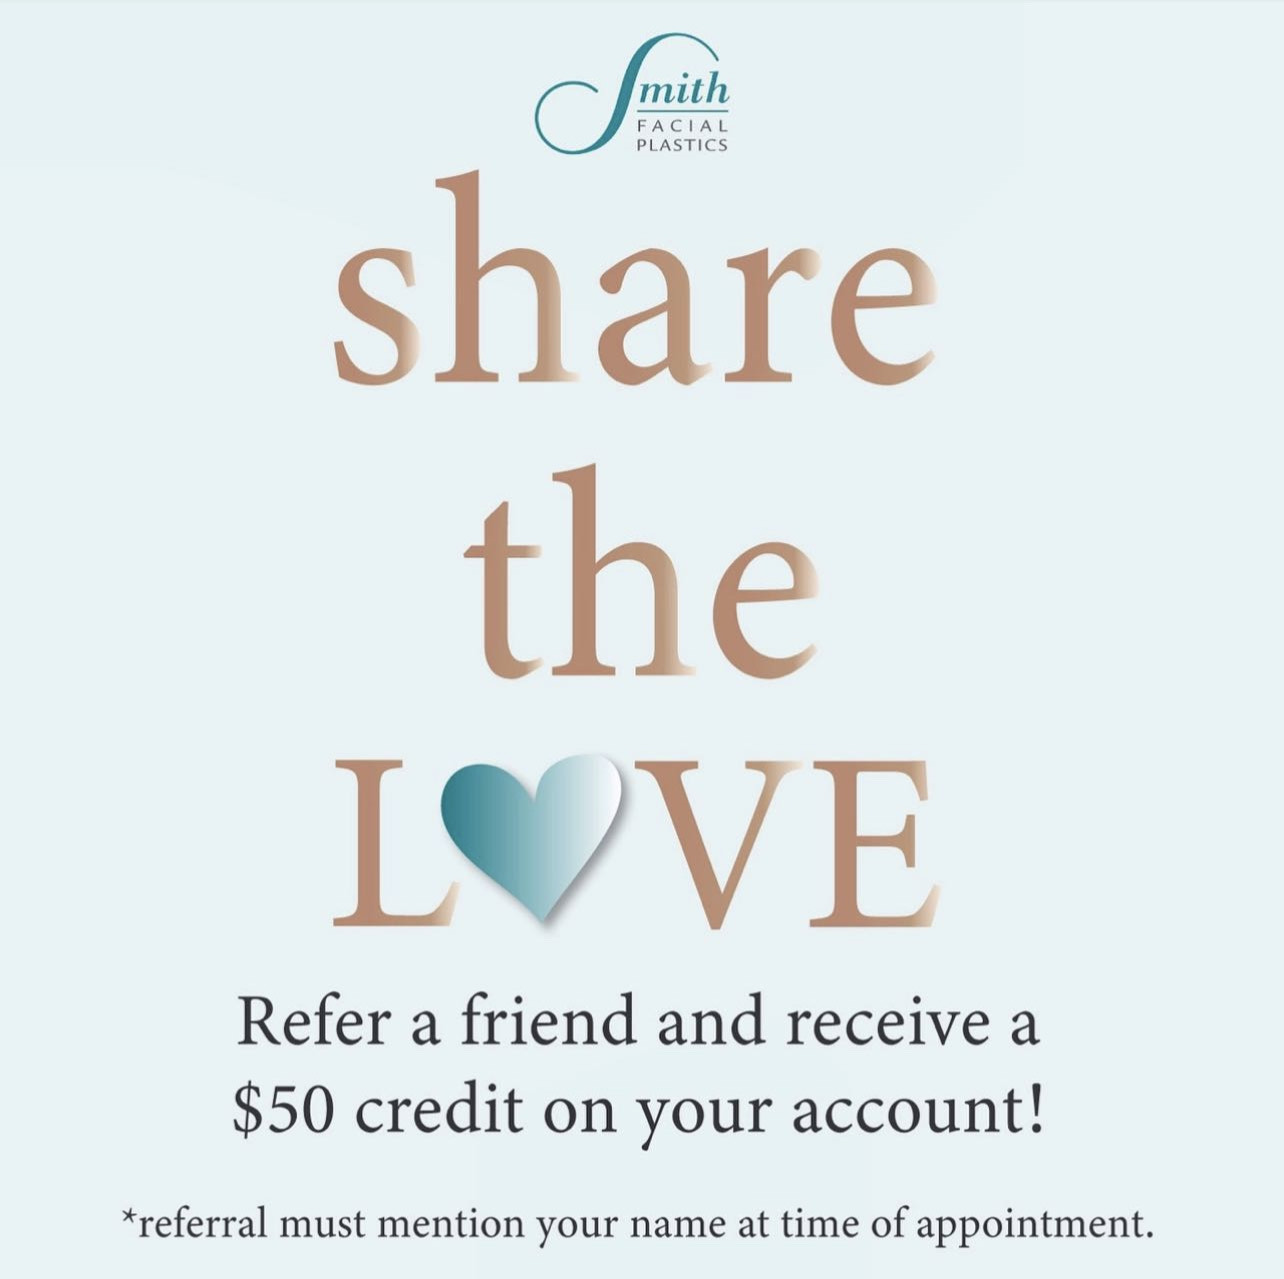 Share the Love: Refer a friend, receive a discount